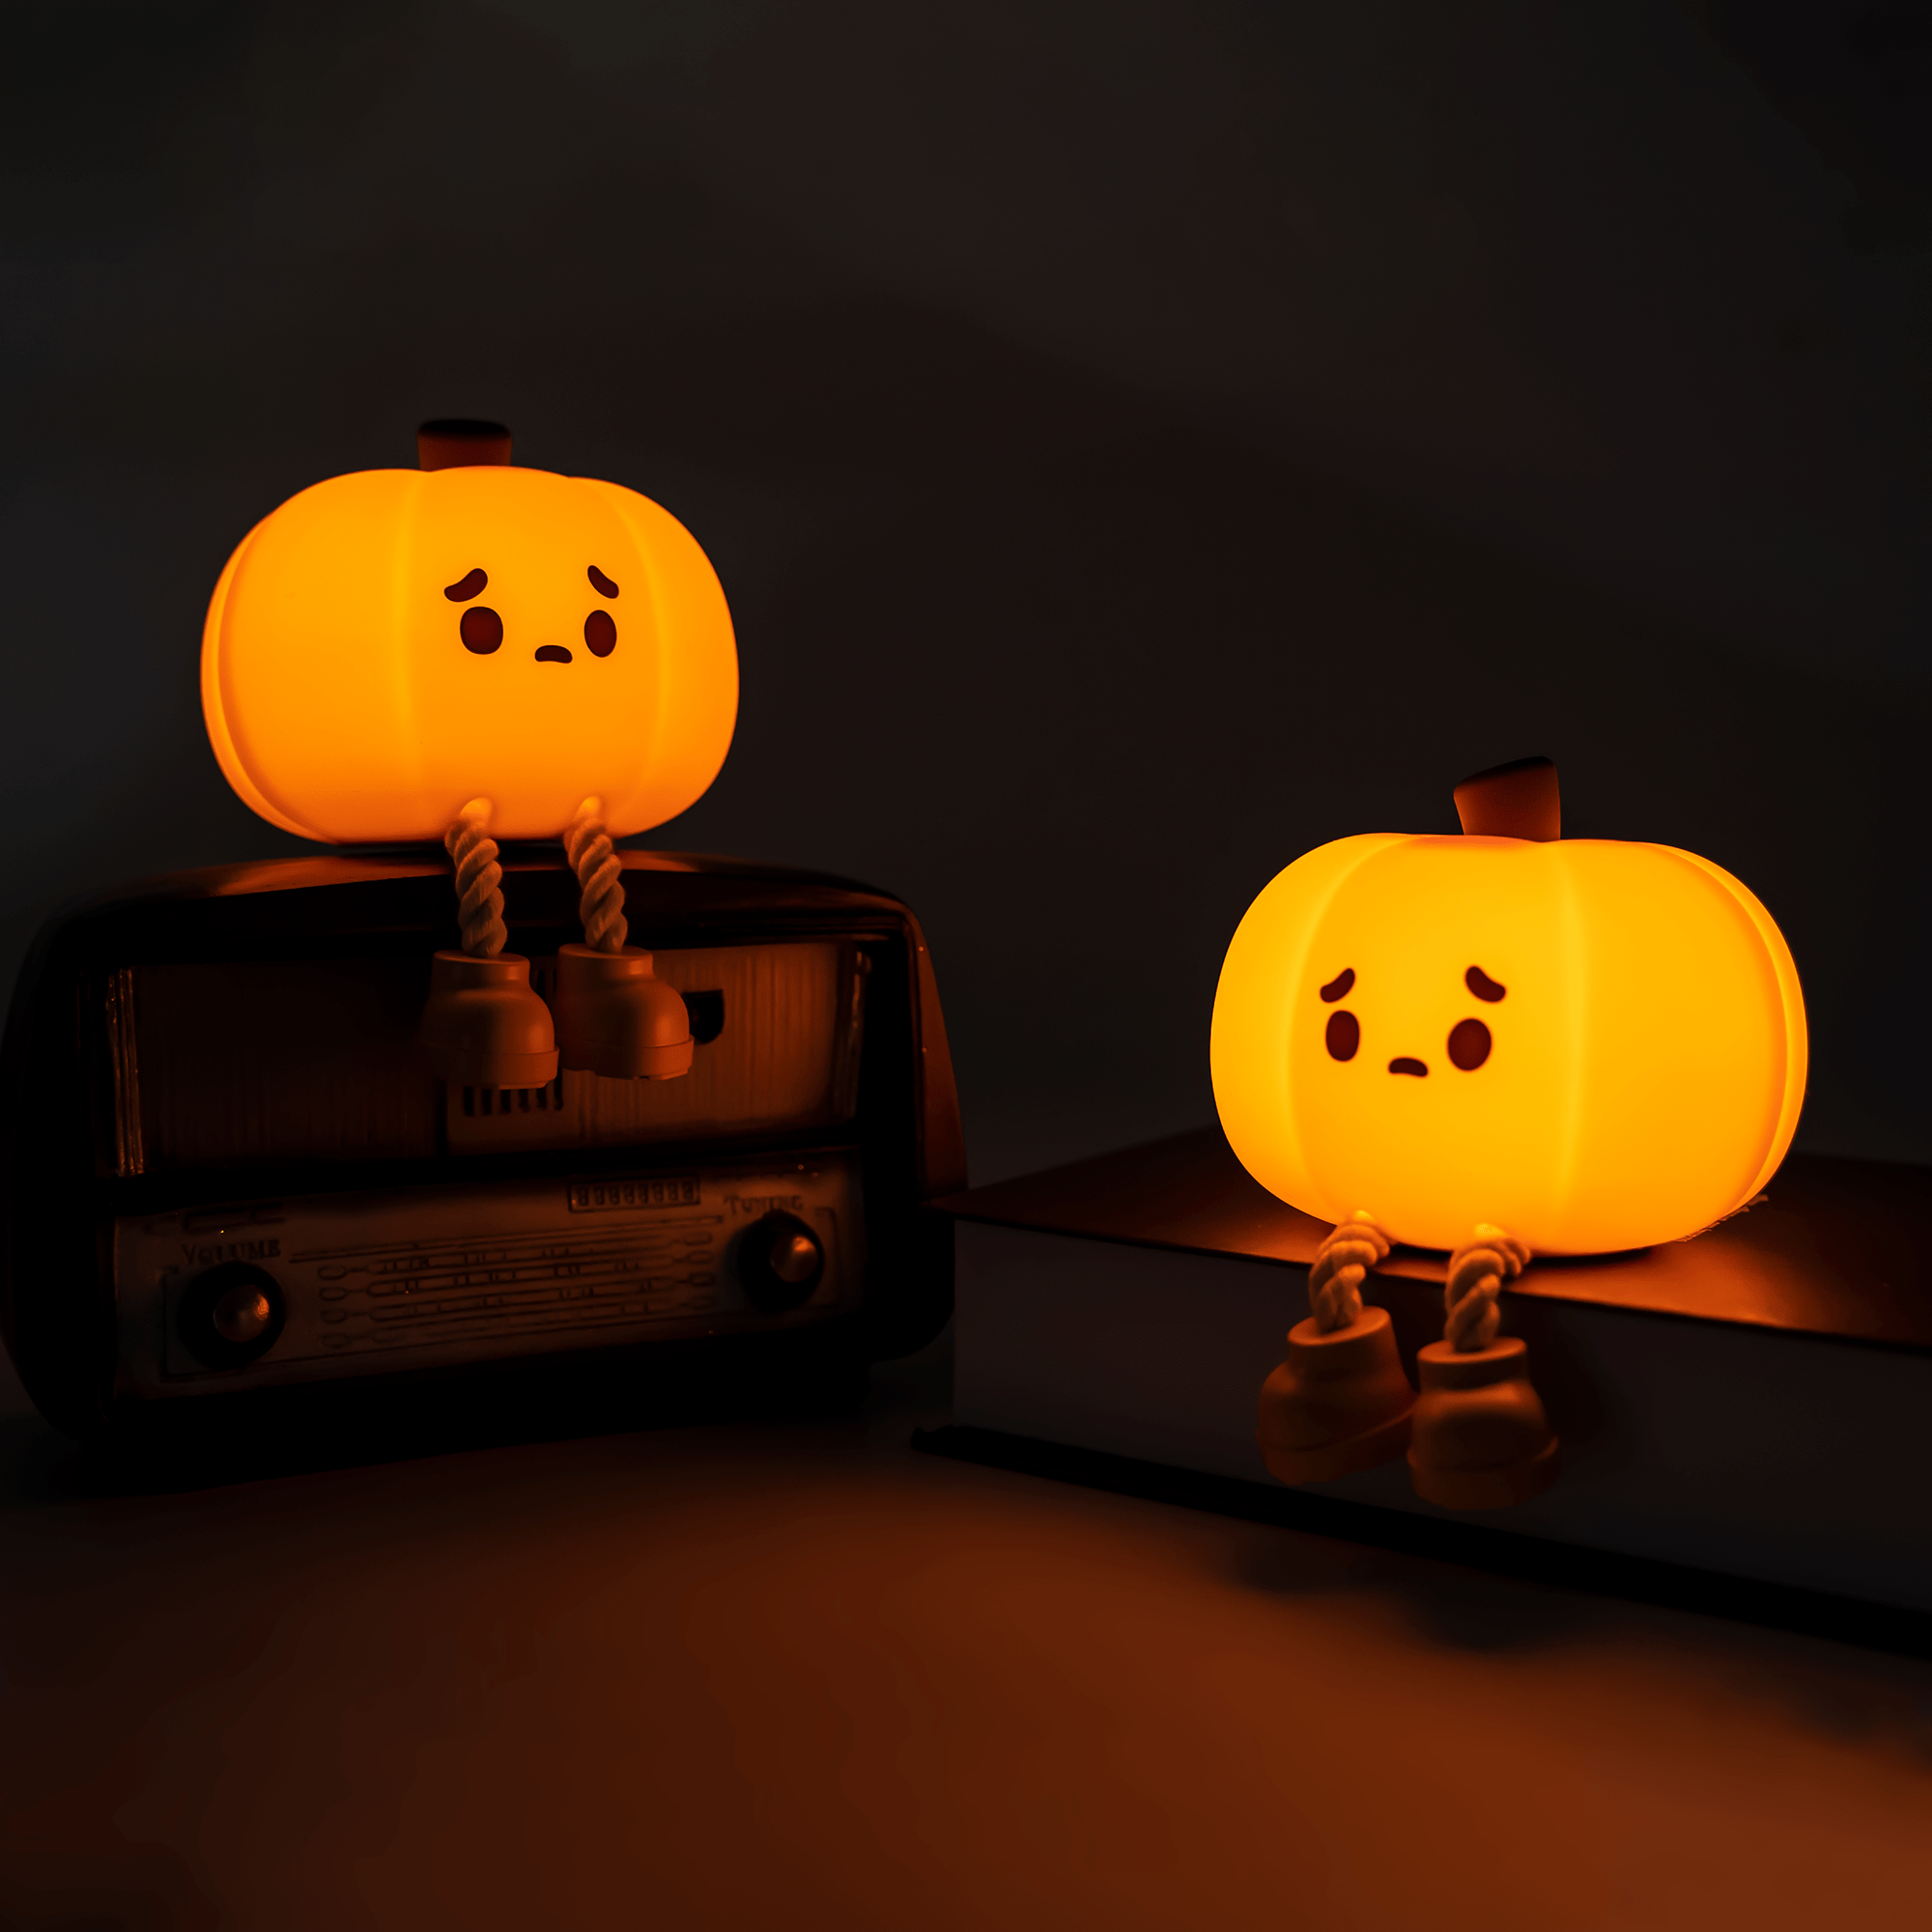 UNEEDE LED Cute Pumpkins Night Light, Cute Halloween Silicone